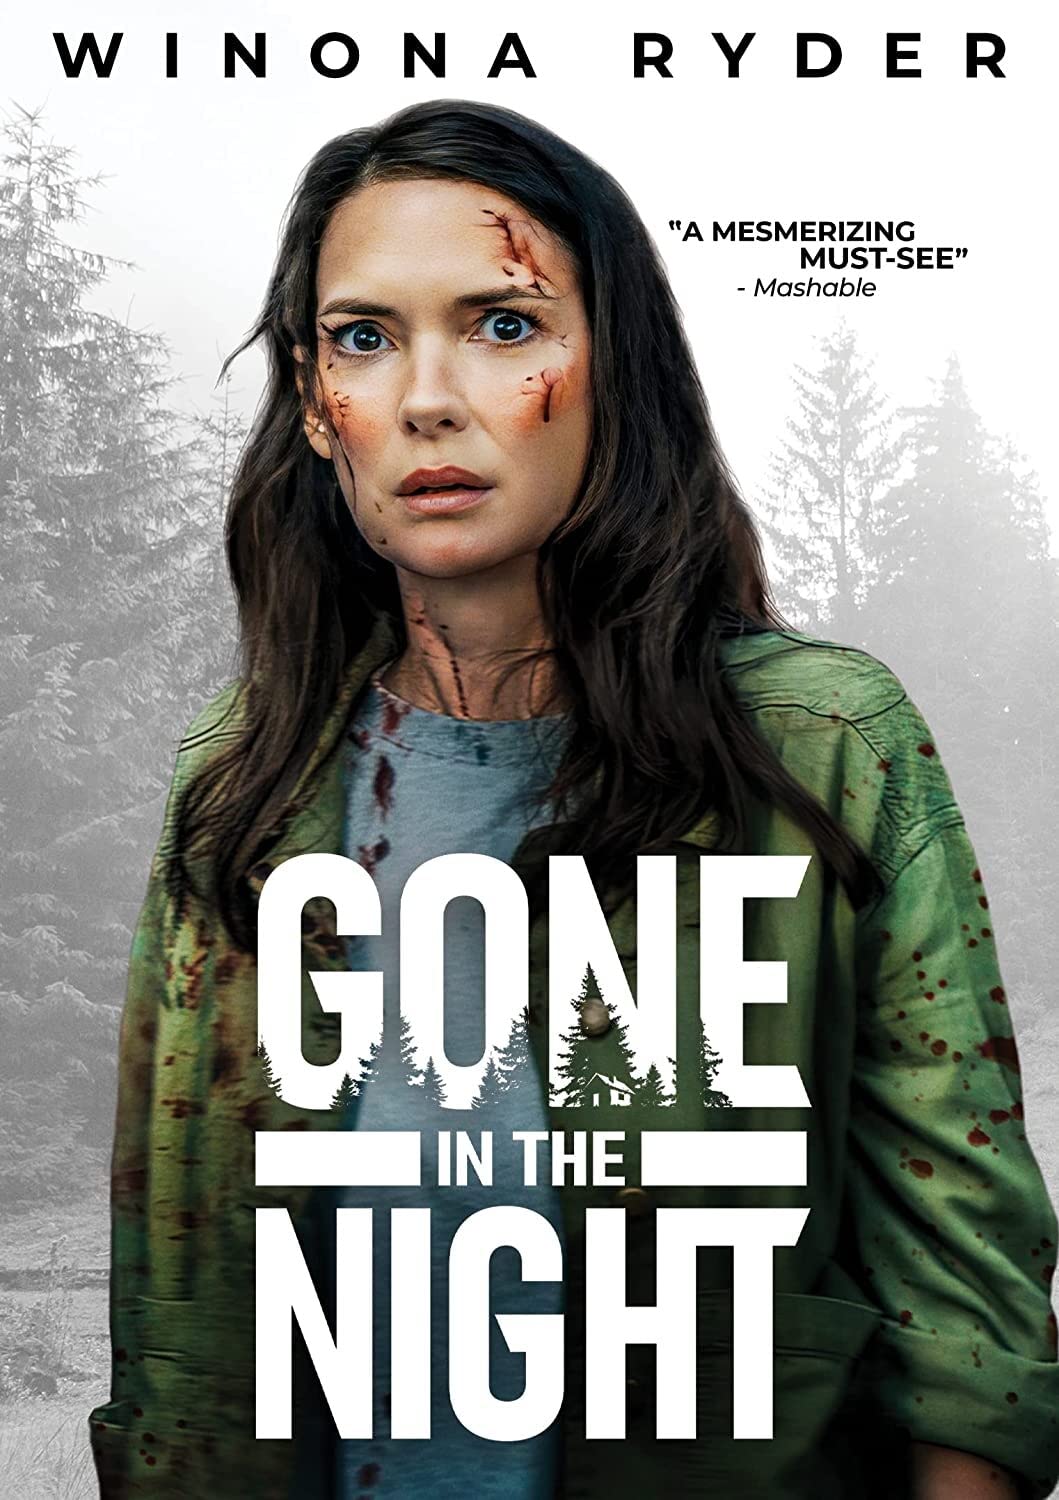 Image for "Gone in the night"